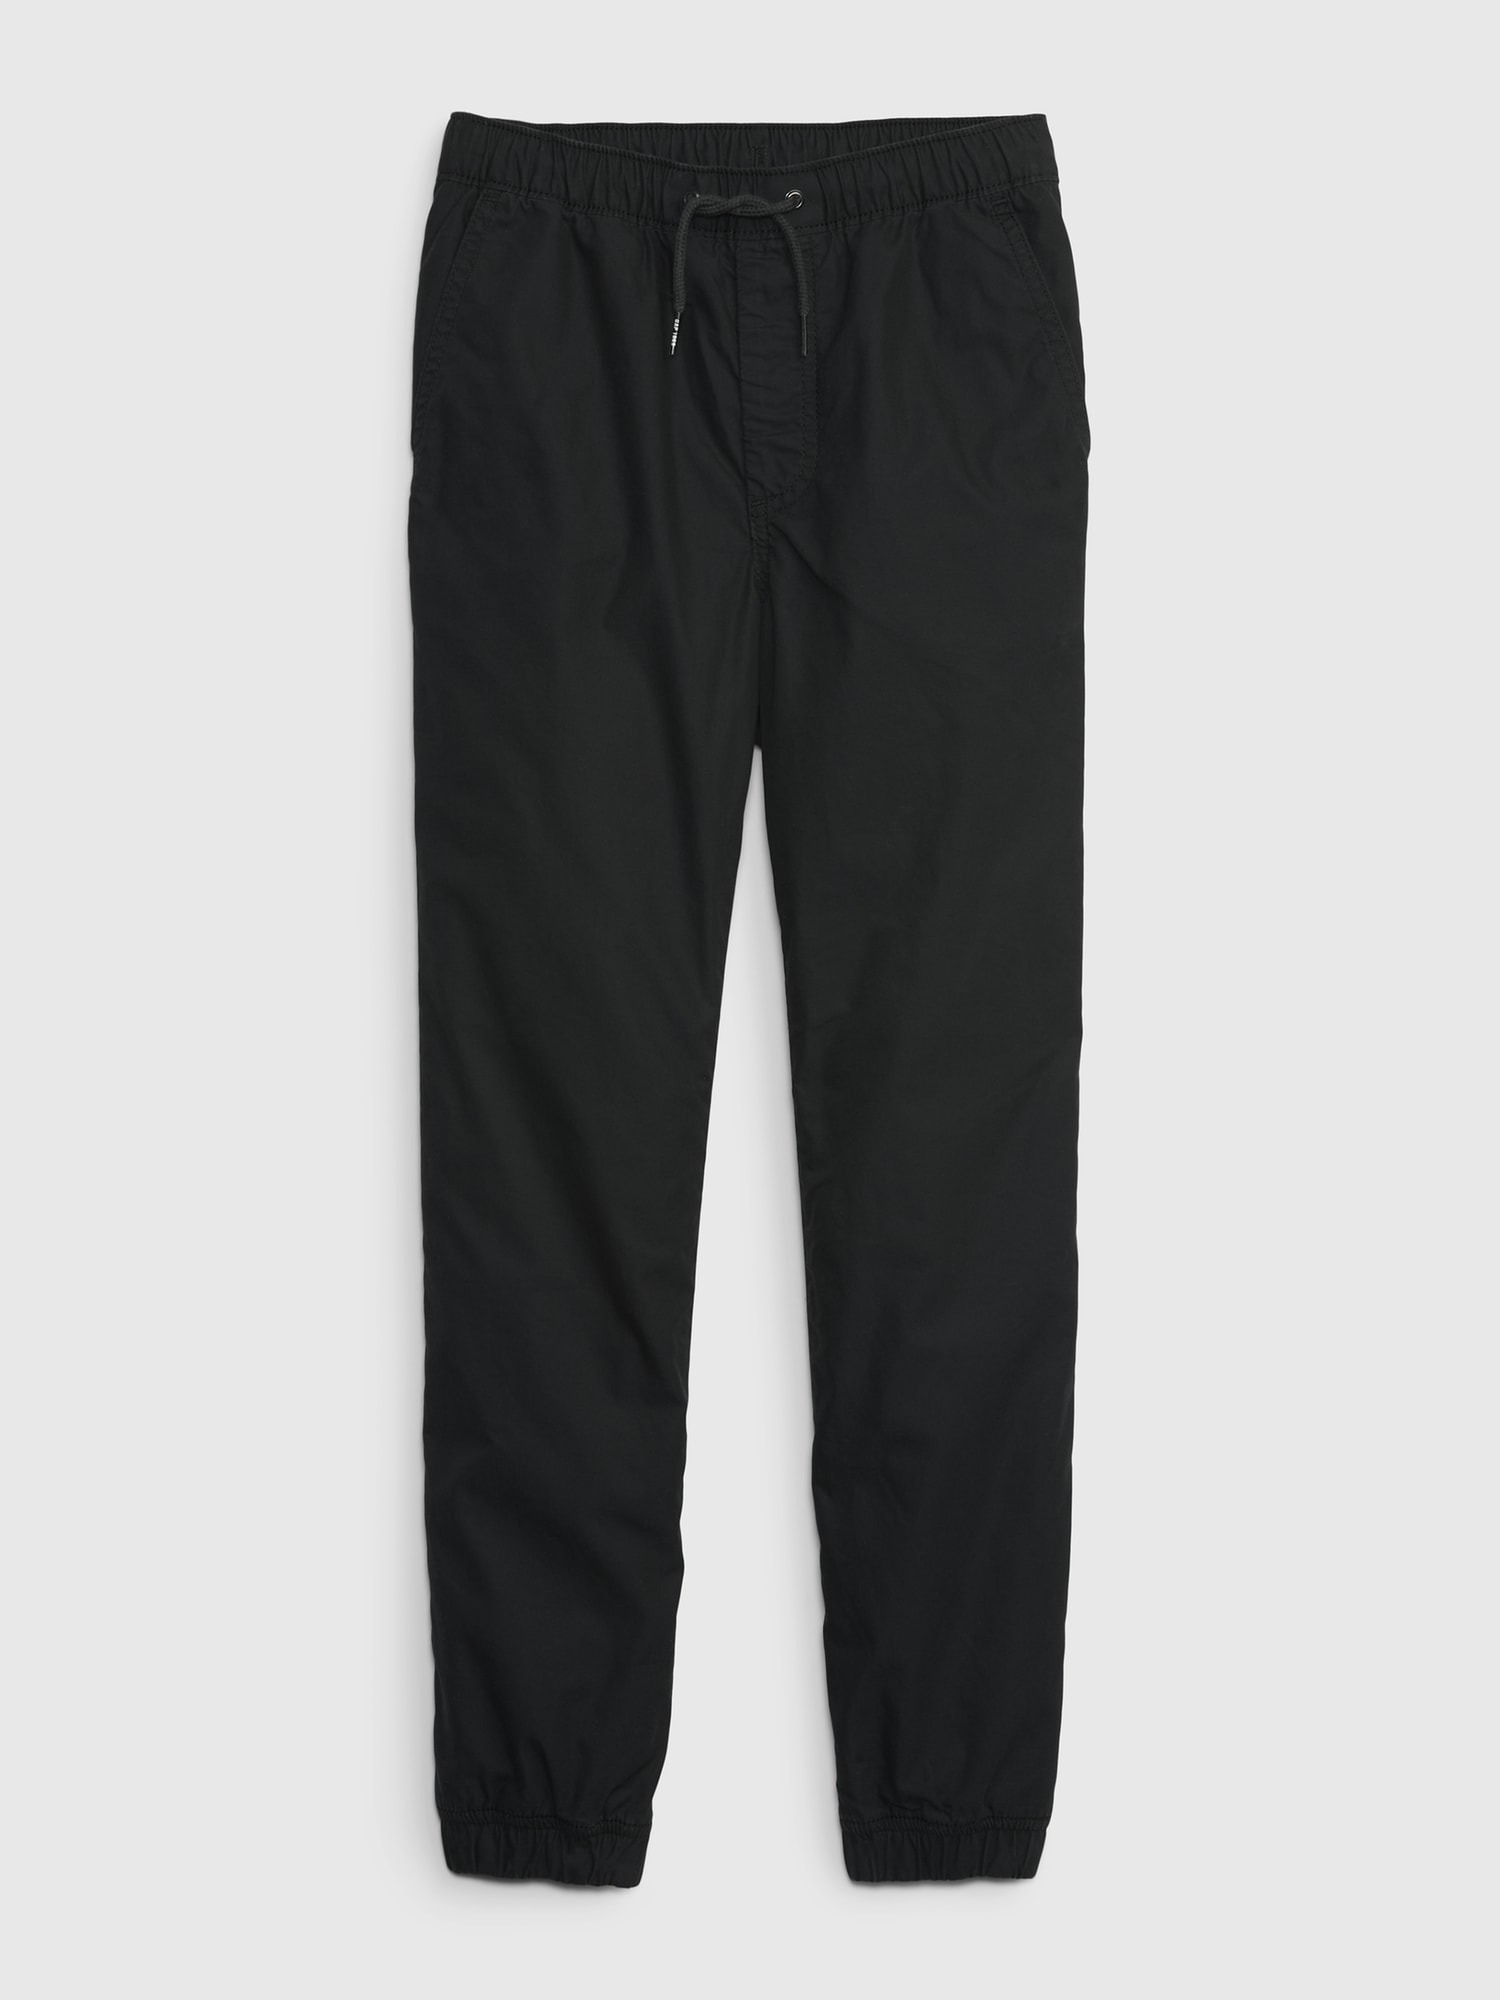 Kids Lined Joggers